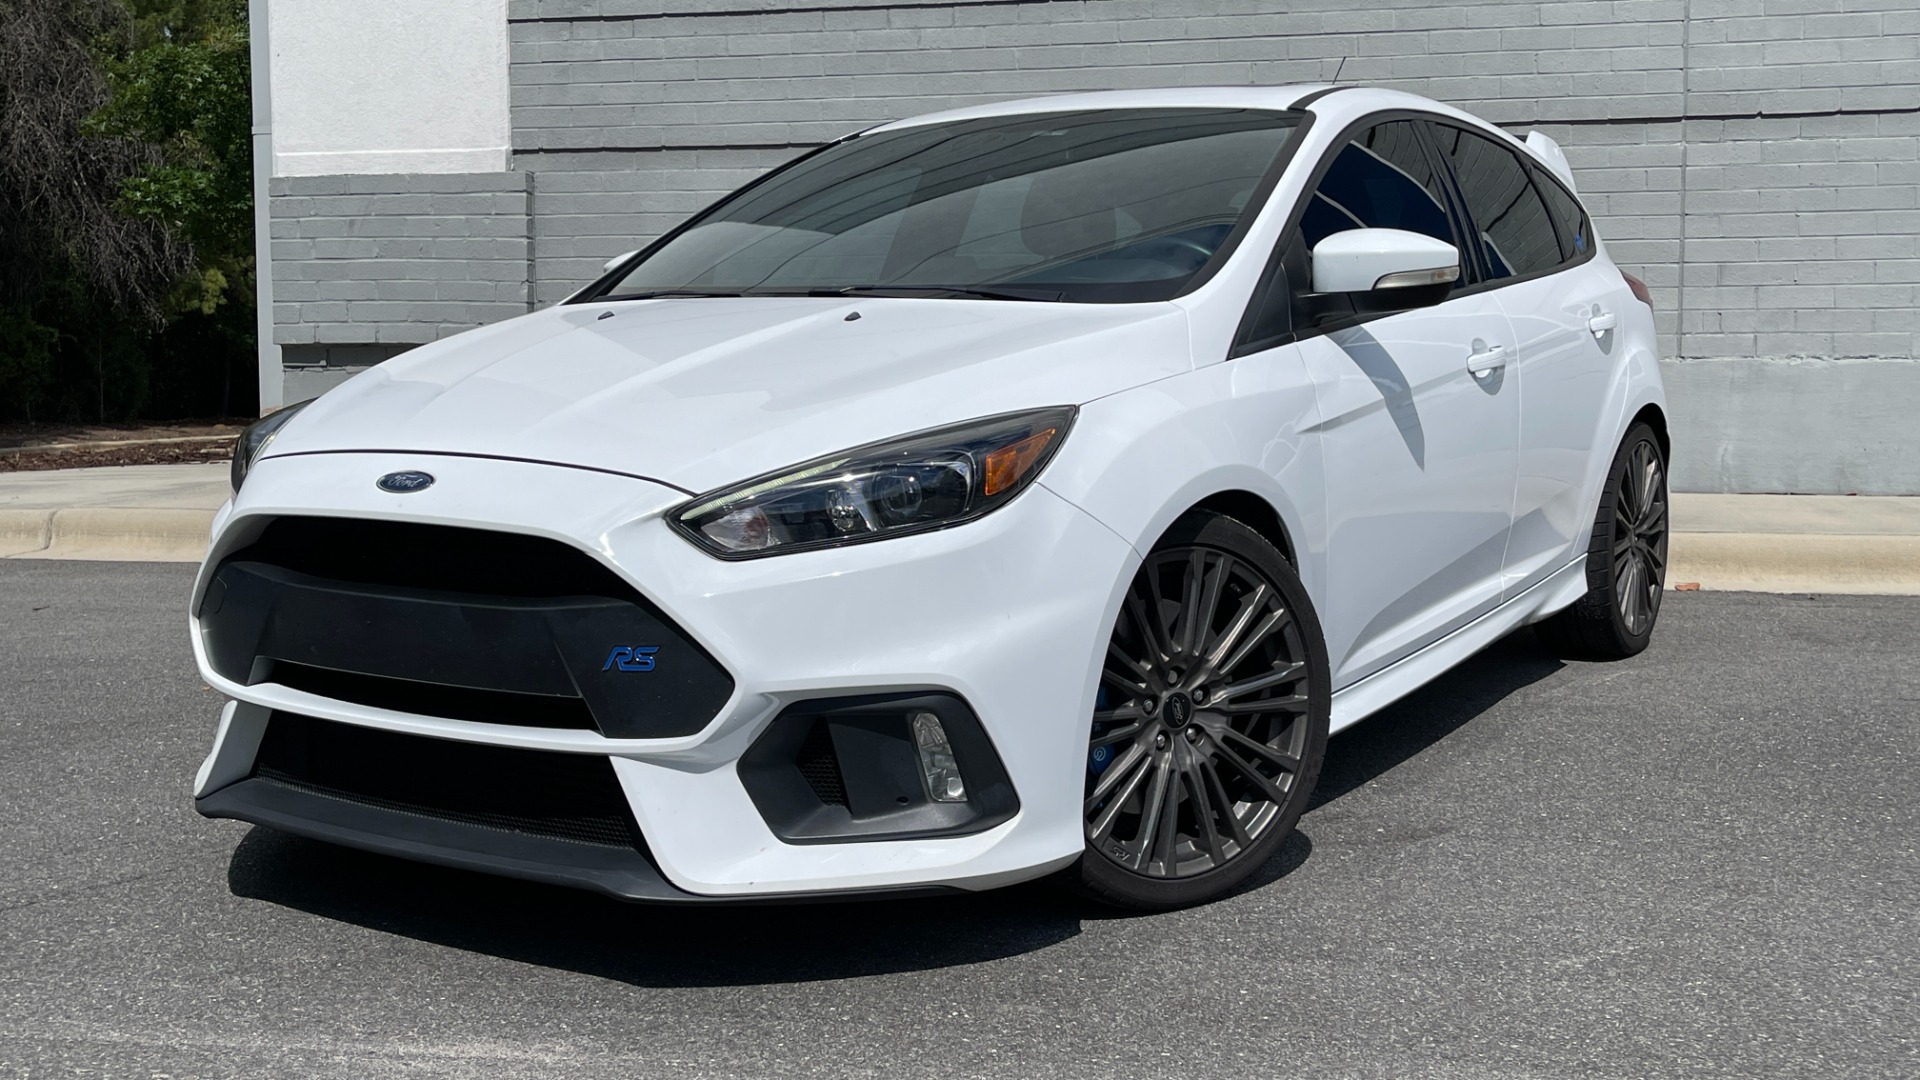 Used 2017 Ford Focus RS / SUNROOF / RS2 PACKAGE / RECAROS / MBRP EXHAUST / ALL WHEEL DRIVE for sale Sold at Formula Imports in Charlotte NC 28227 50